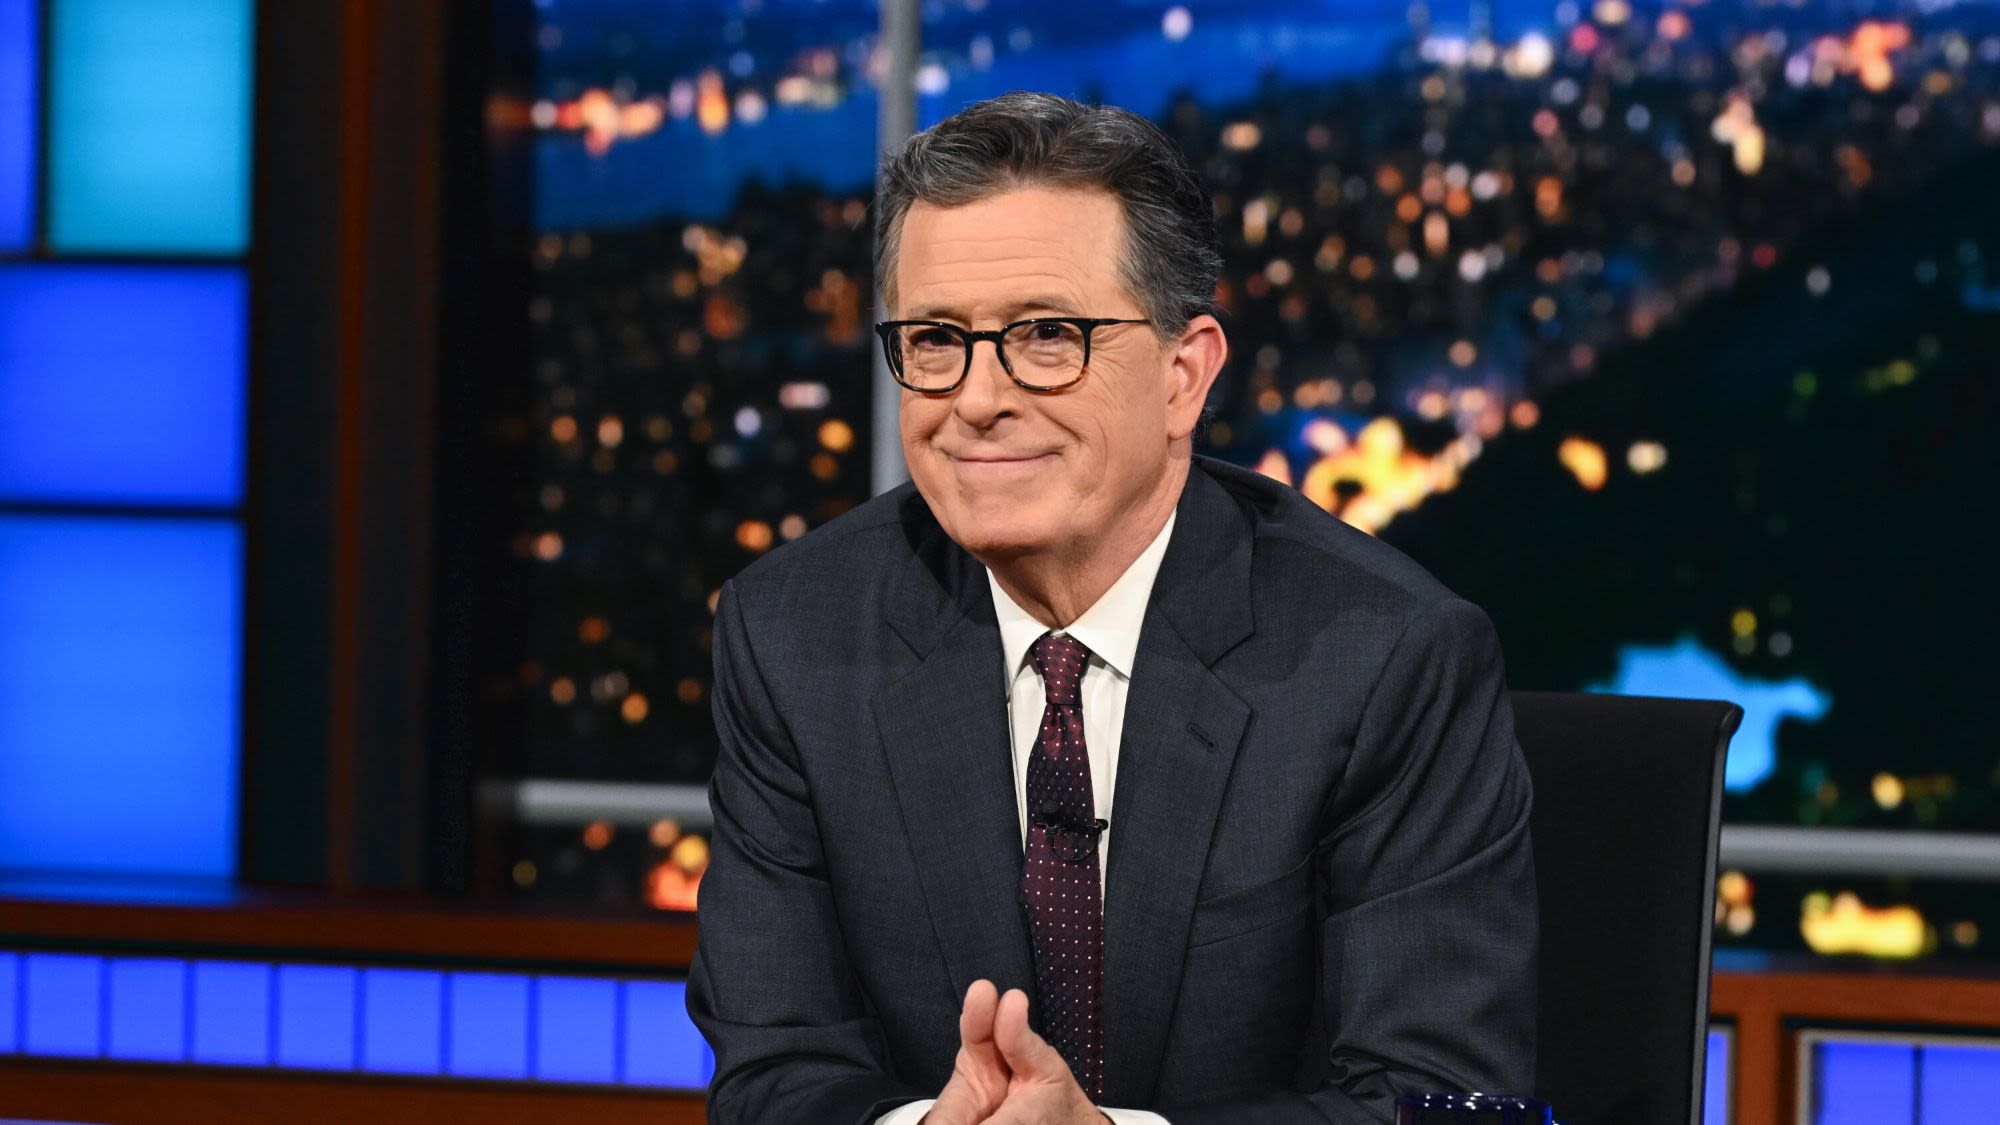 Why The Late Show with Stephen Colbert is not new this week, July 1-5